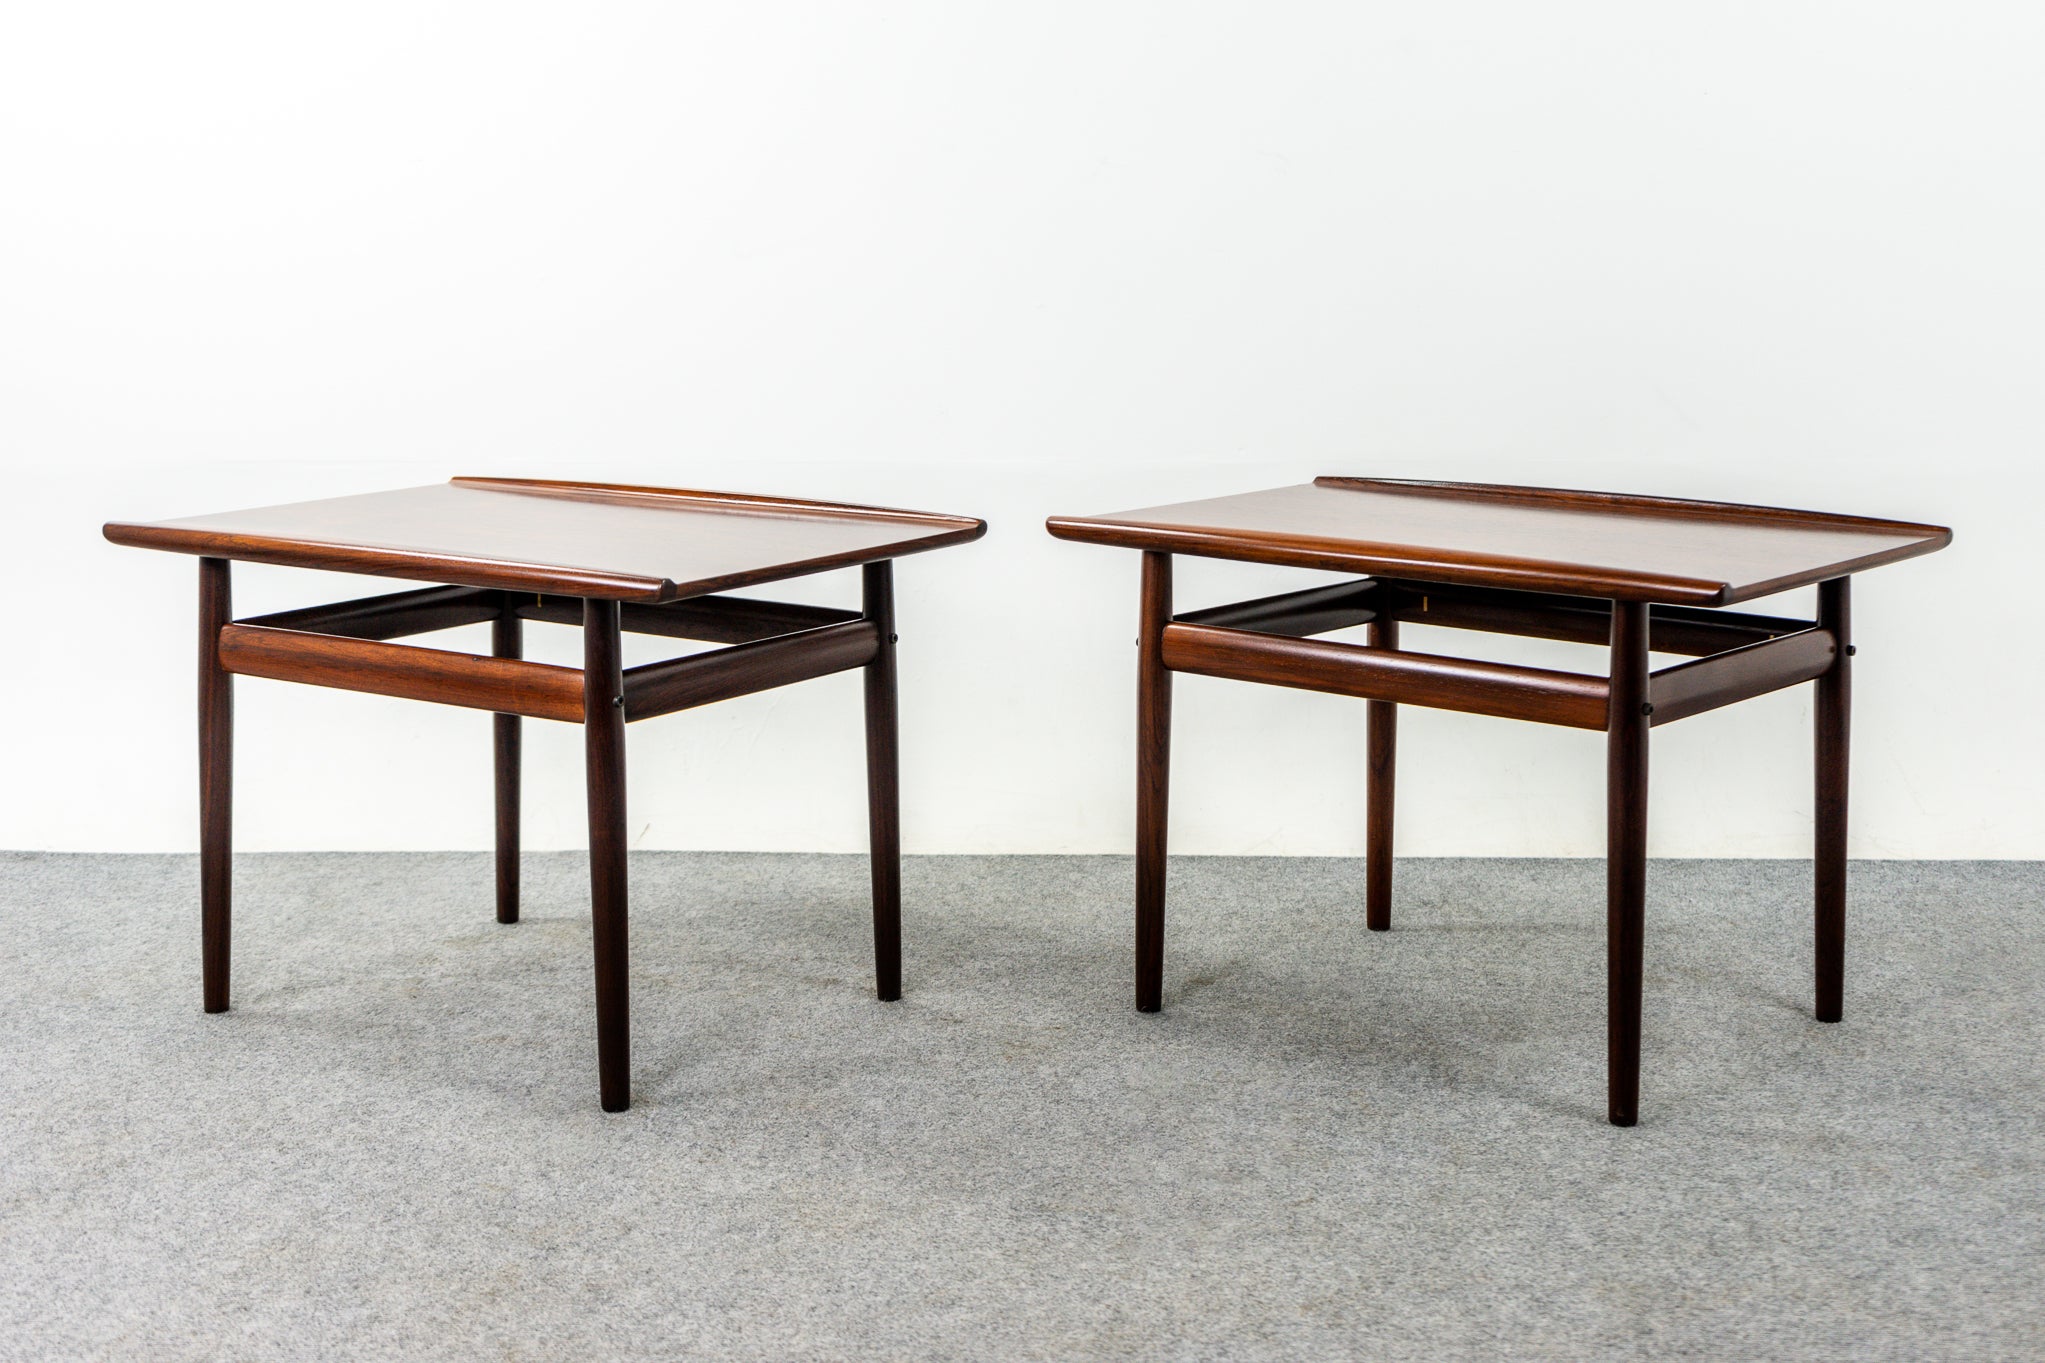 Pair of Mid-Century Modern Rosewood Side Tables, Svend A. Eriksen for Glostrup